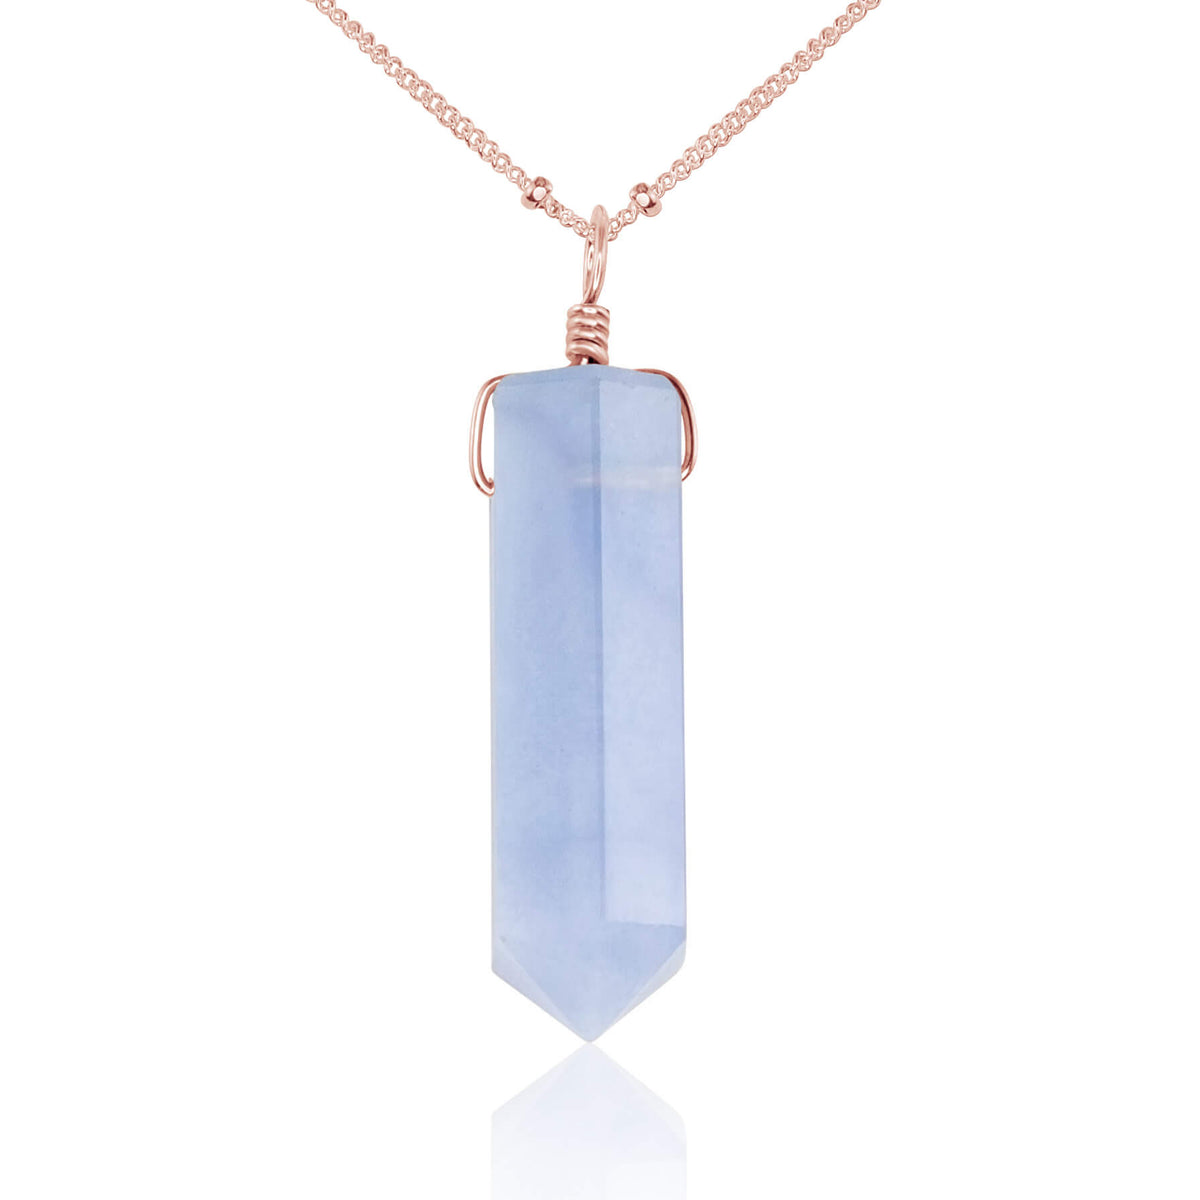 Large Crystal Point Necklace - Blue Lace Agate - 14K Rose Gold Fill Satellite - Luna Tide Handmade Jewellery